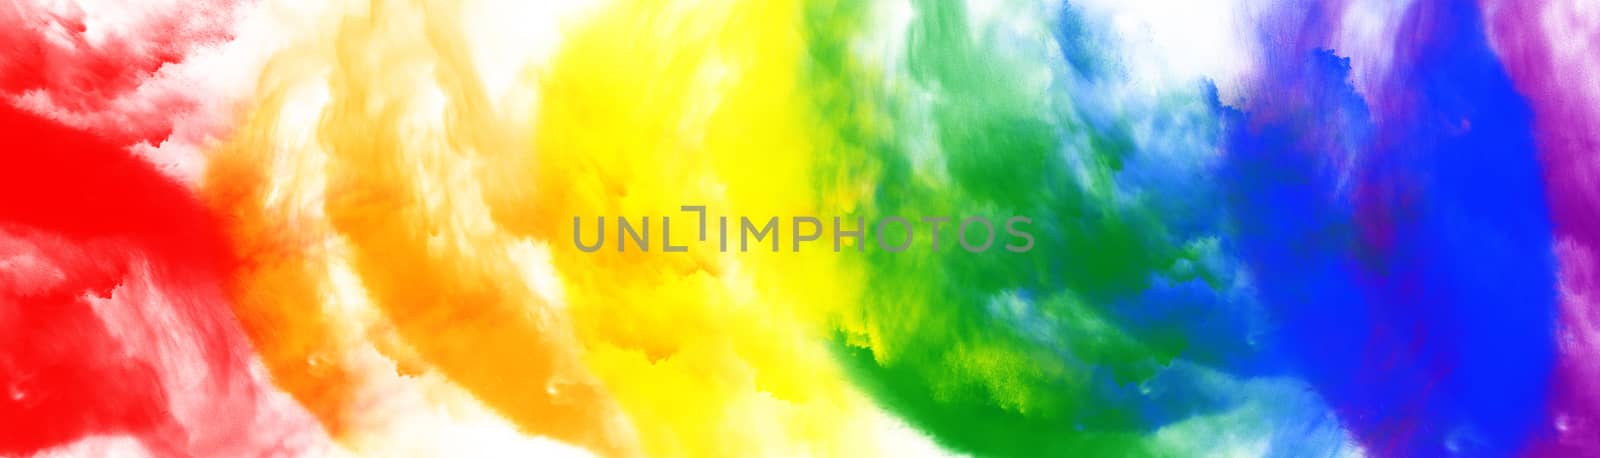 Abstract image of color powder in LGBT color, digital illustration